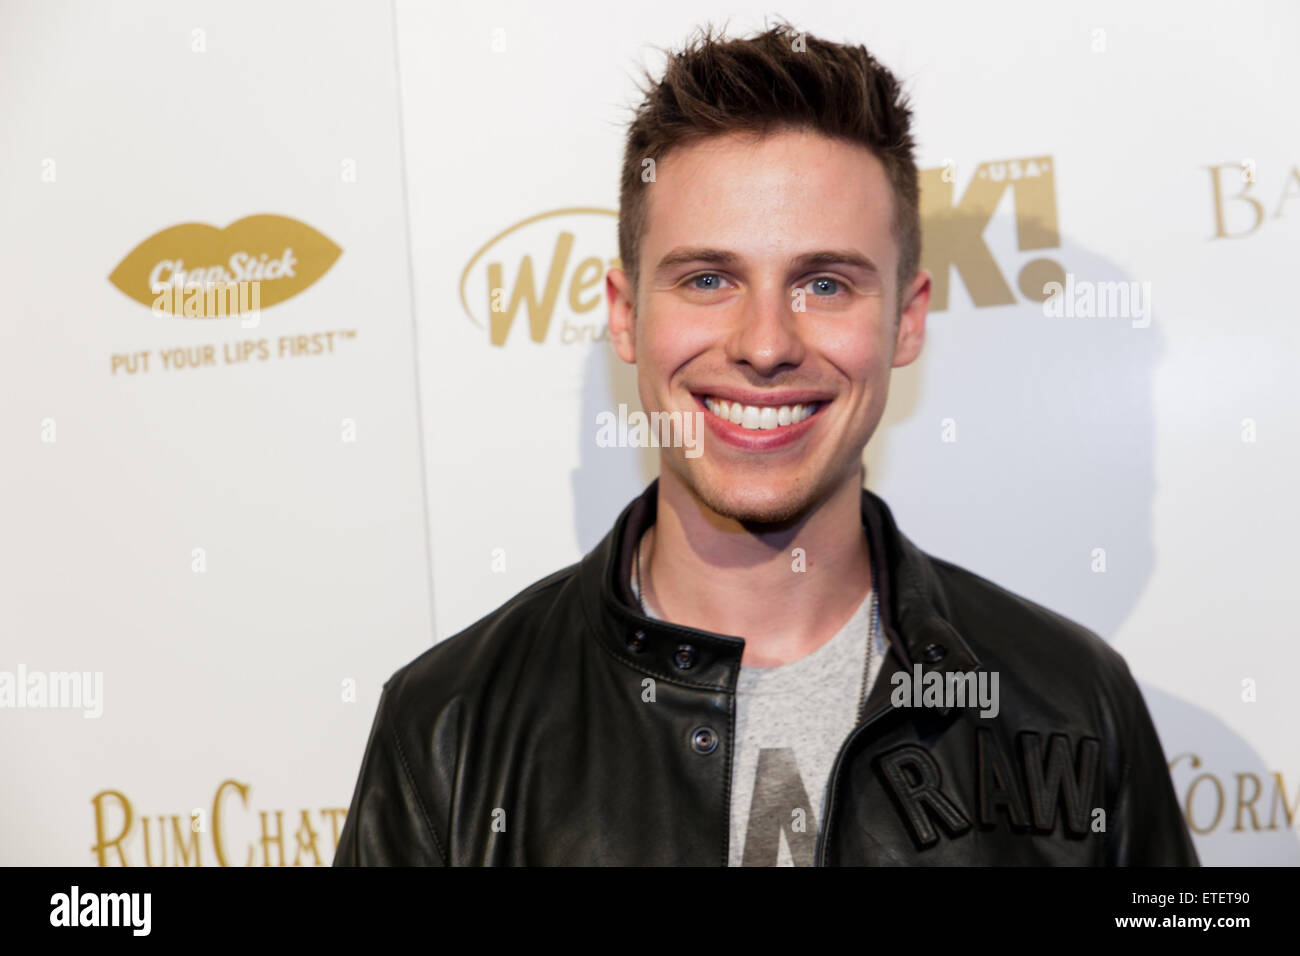 OK! Magazine pre-Grammy party at Lure Nightclub with a performance by Nico & Vinz  Featuring: Travis McClung Where: Hollywood, California, United States When: 05 Feb 2015 Credit: WENN.com Stock Photo